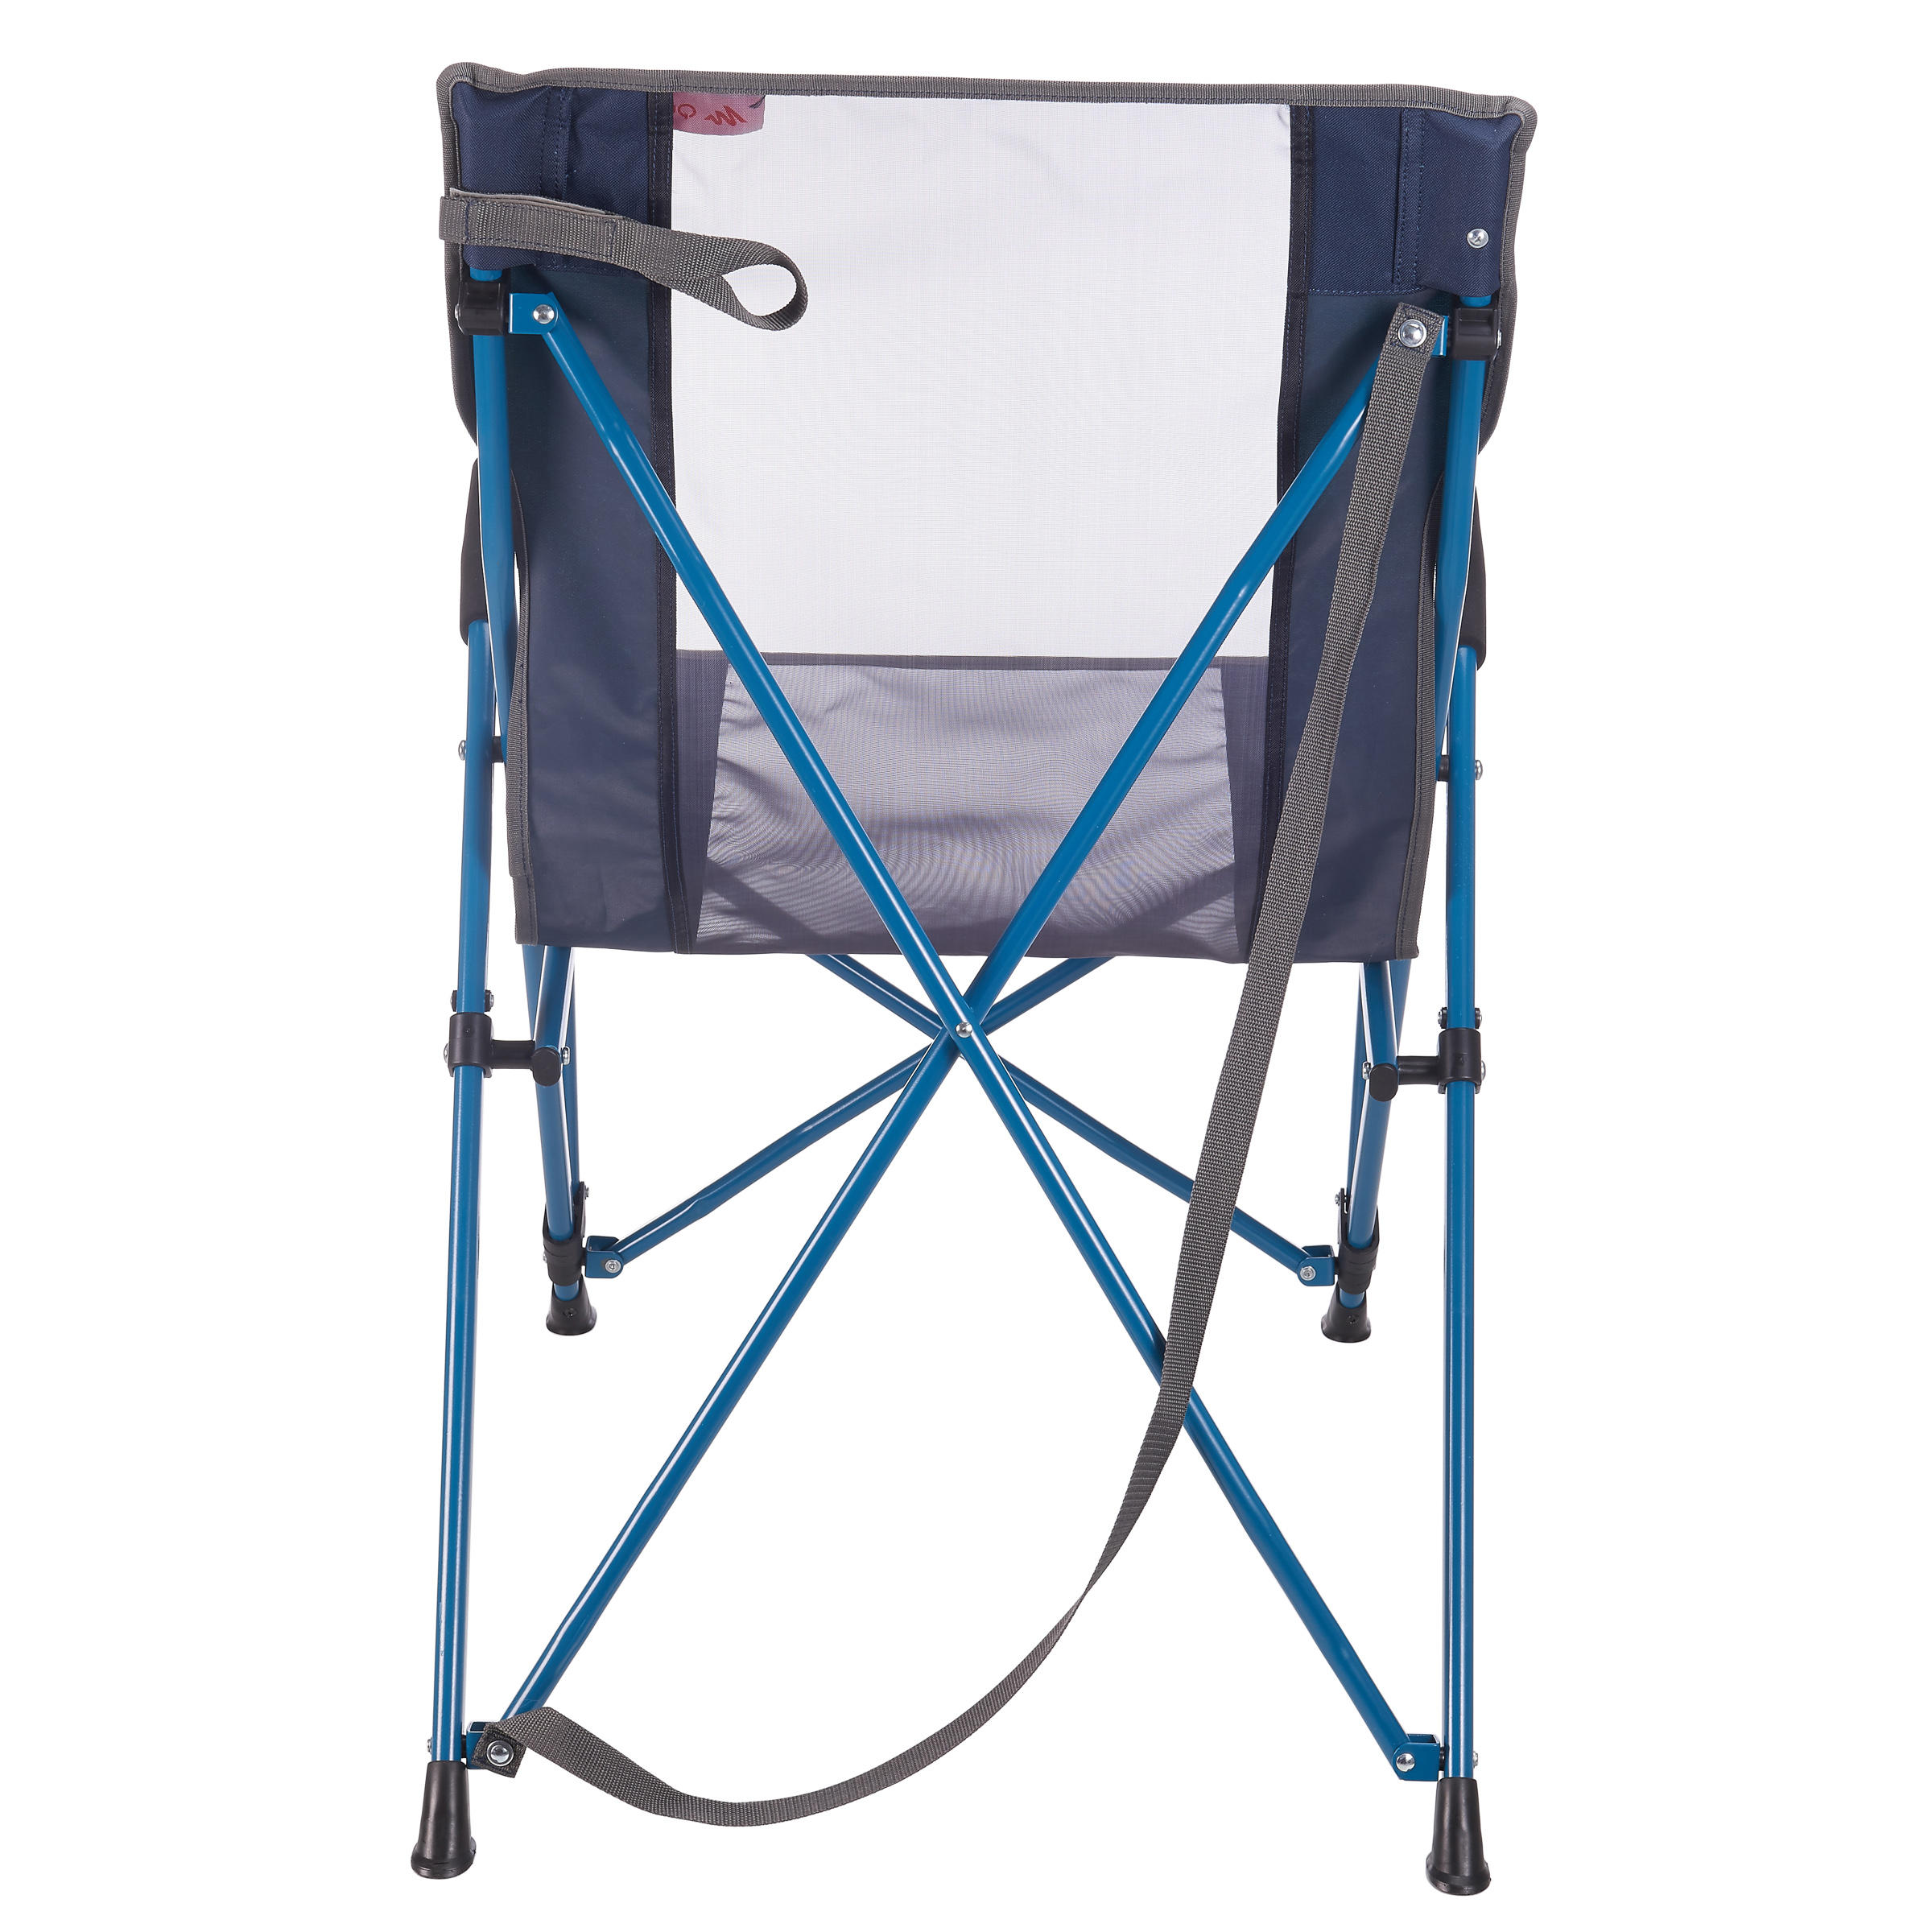 COMFORT CHAIR FOR CAMPING - BLUE 4/10